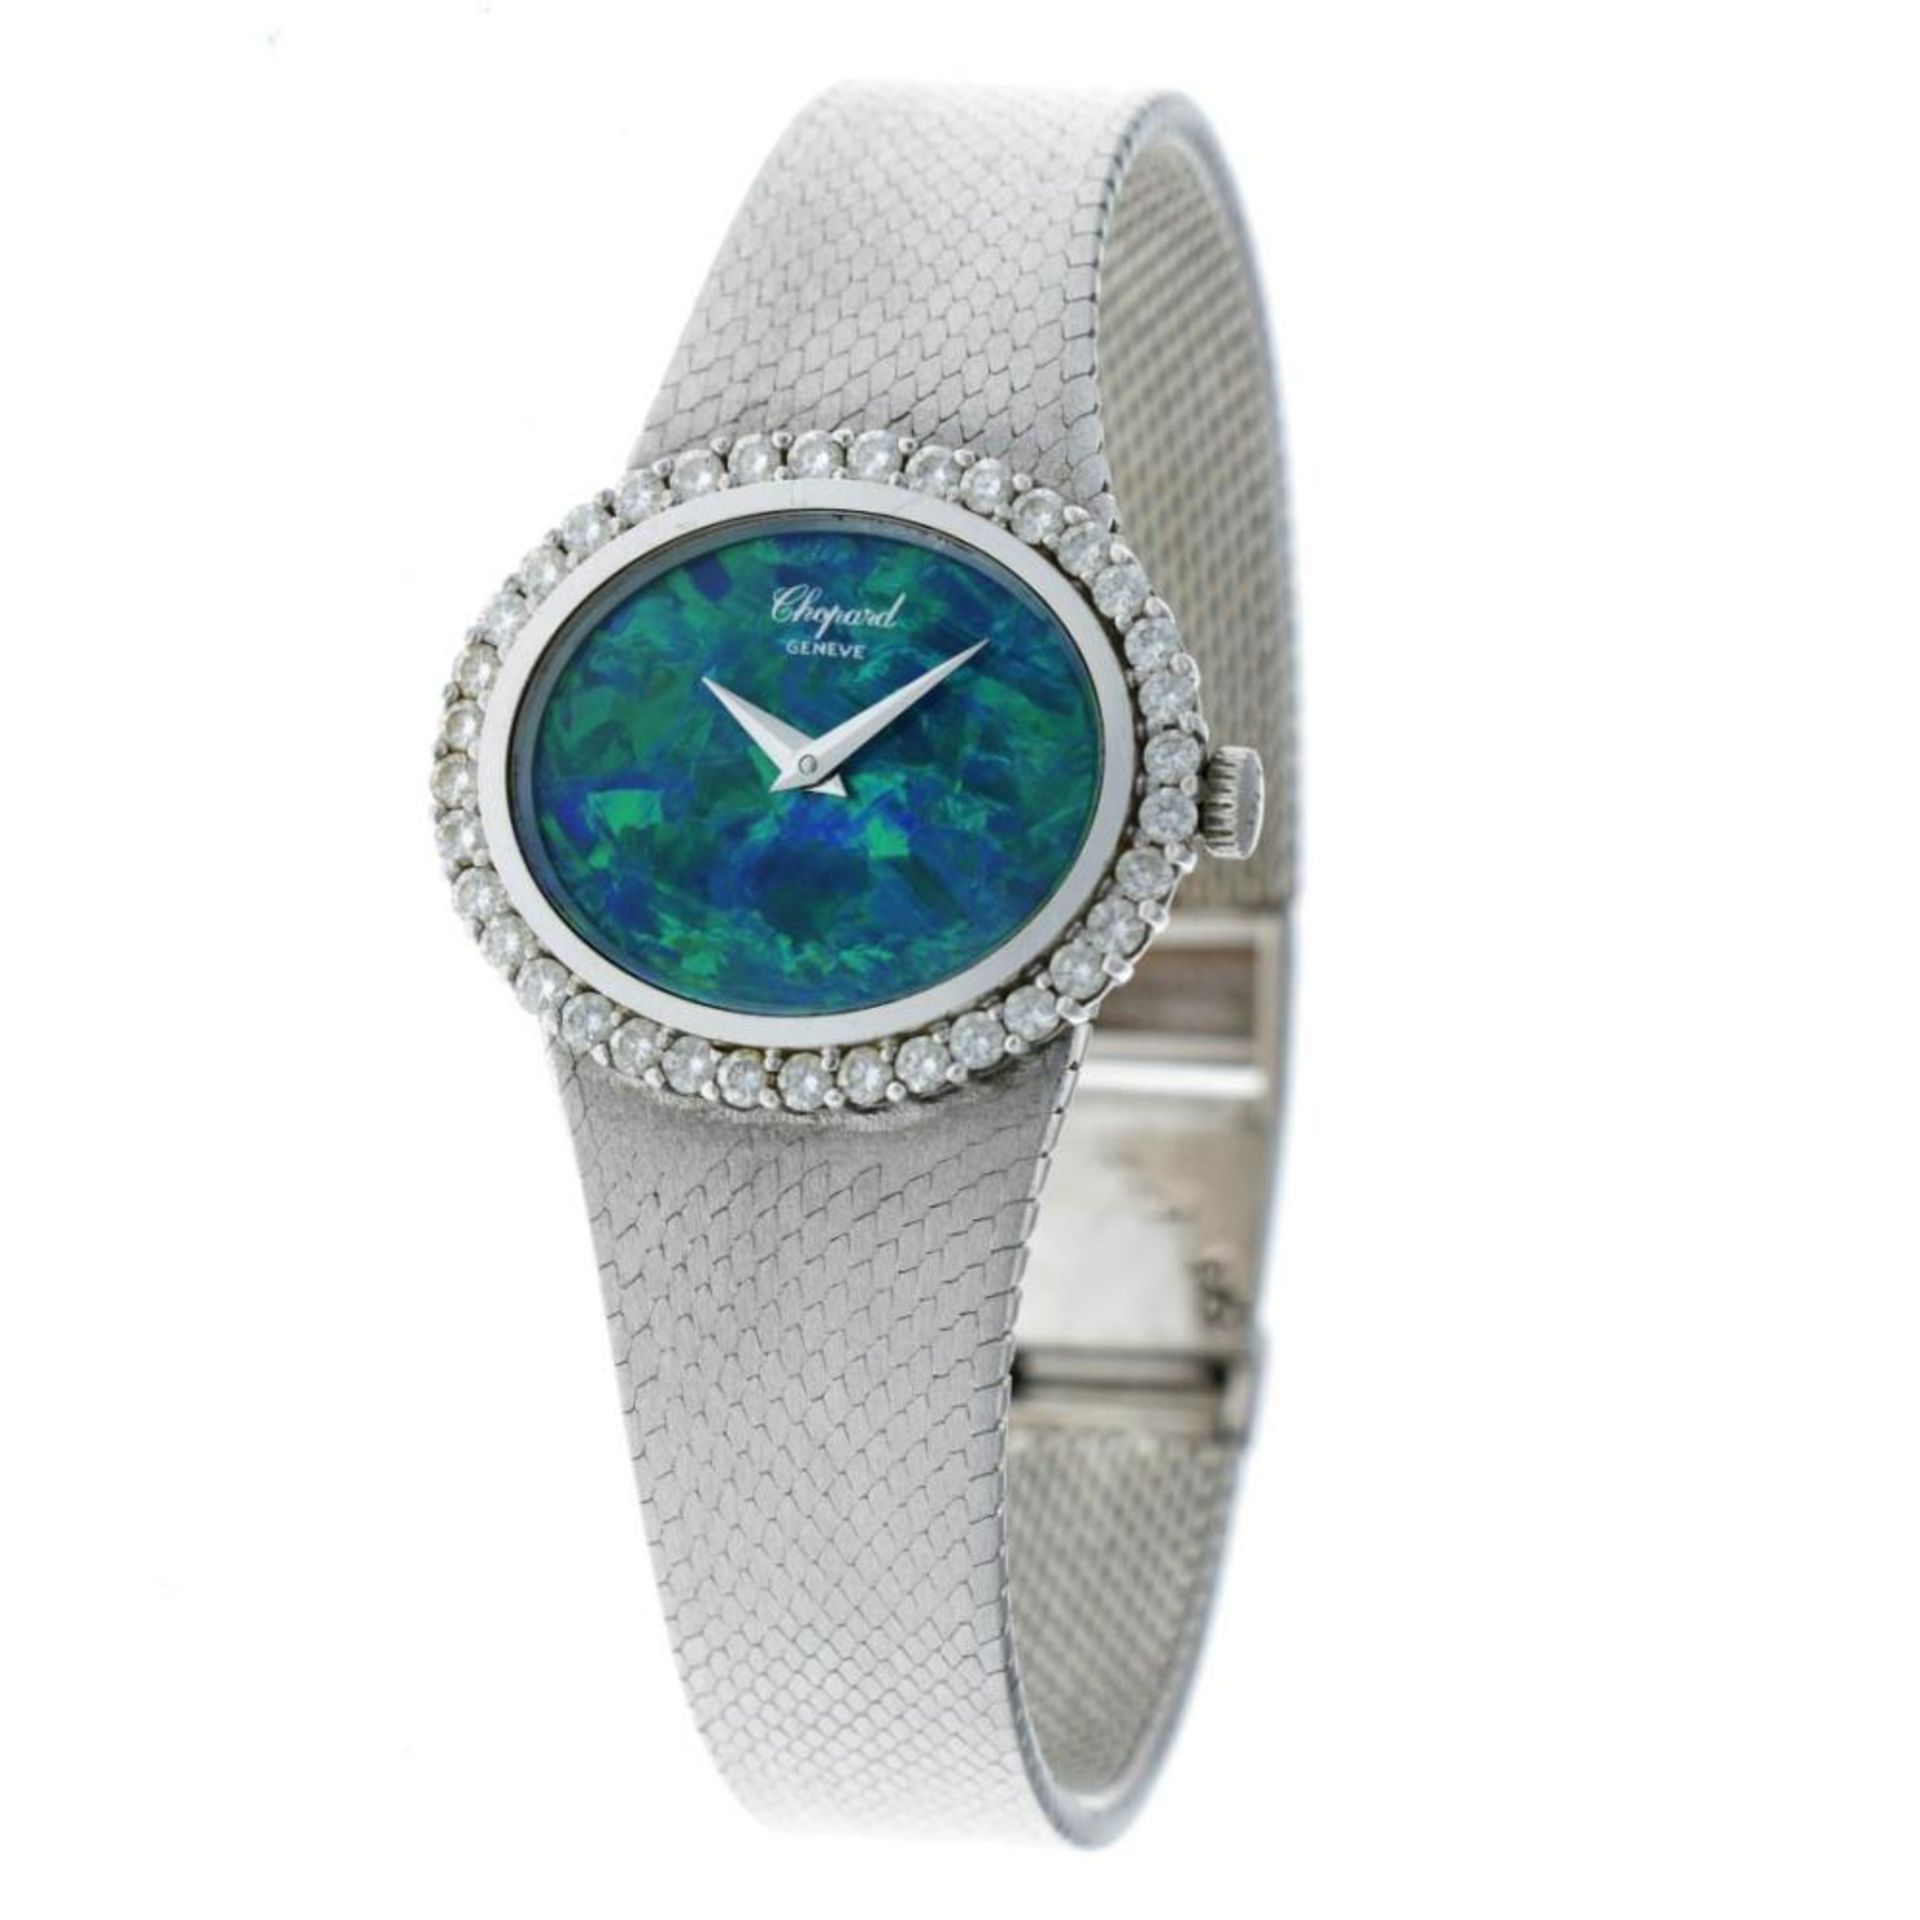 Chopard 5036 1 - Opal dial Diamonds - Ladies watch - approx. 1975. - Image 4 of 12